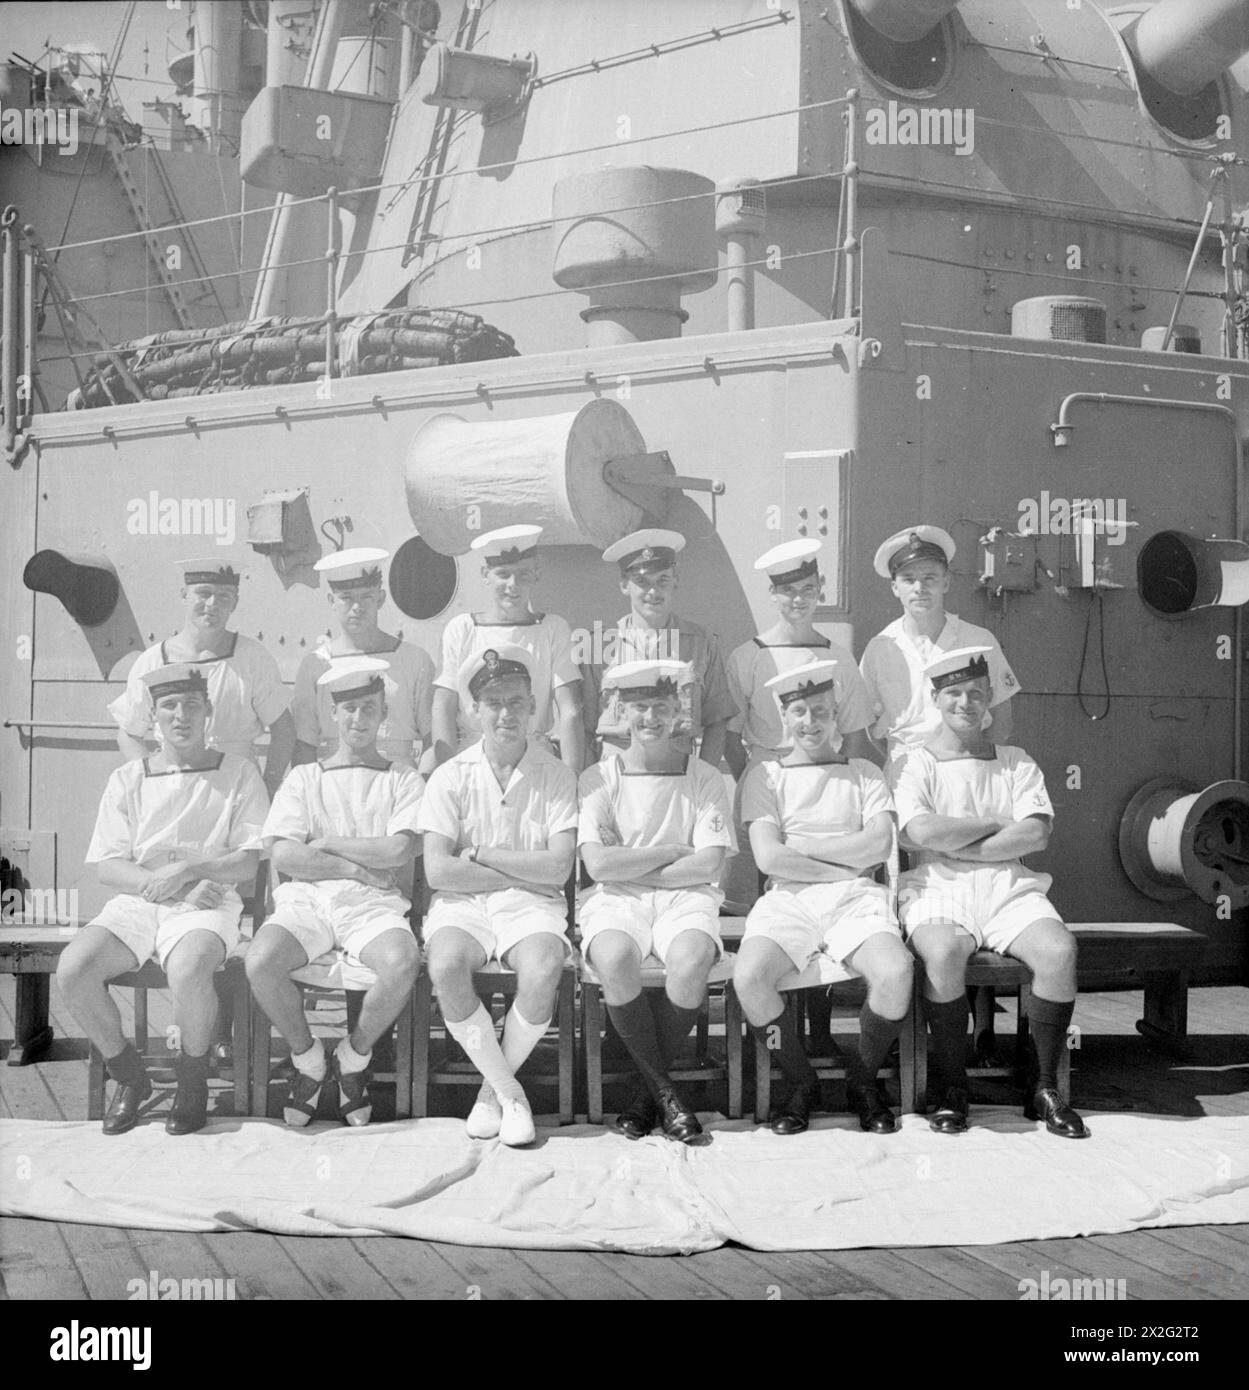 MEN OF THE HMS SUFFOLK, A CRUISER SERVING WITH ADMIRAL JAMES SOMERVILLE'S EASTERN FLEET. 12 DECEMBER 1943, TRINCOMALEE. THE MEN ARE DIVIDED INTO GROUPS BY TOWN AND/OR DISTRICT. - Sheffield and District group. First row, left to right: AB J Stratford, Crooks; AB R Dewsnap, Barnsley; OA R Oliver, Firth Park, L/Sea T Fox, Ecclesfall; AB E Mycock, Stalker Place; L/Sea J Langton, Firth Park. Second row, left to right: AB S Riley, Hayland; AB W Drayton, Chesterfield; O/Sea G Massa, Parson Cross; Mne J Senior, Rotherham; AB H Oxley, Rotherham; L/Stwd J Brown, Middlesbro Stock Photo